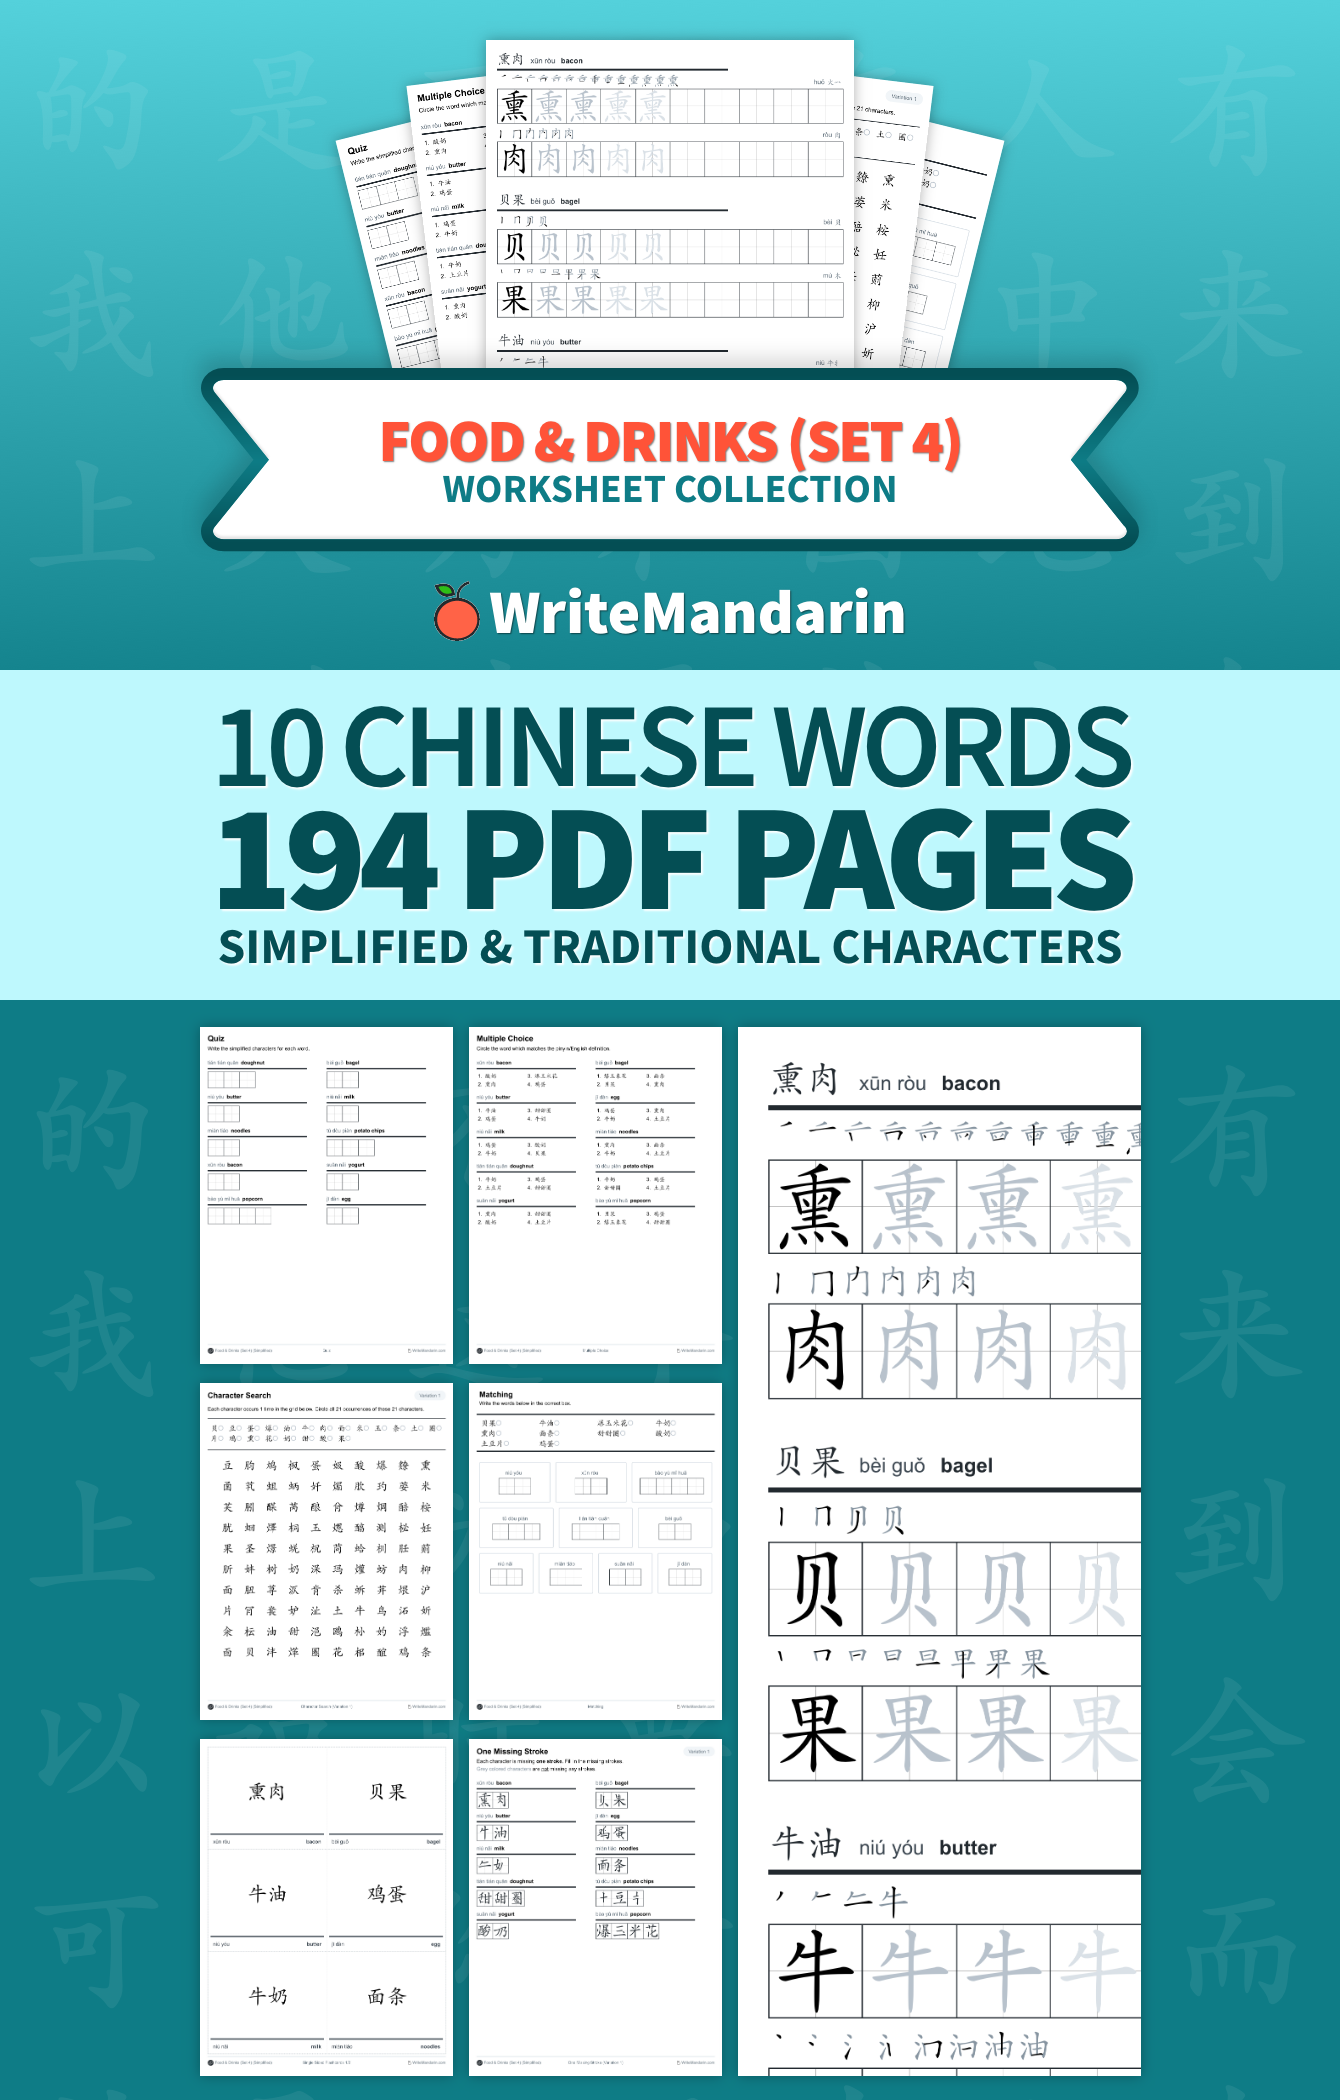 Preview image of Food & Drinks (Set 4) worksheet collection